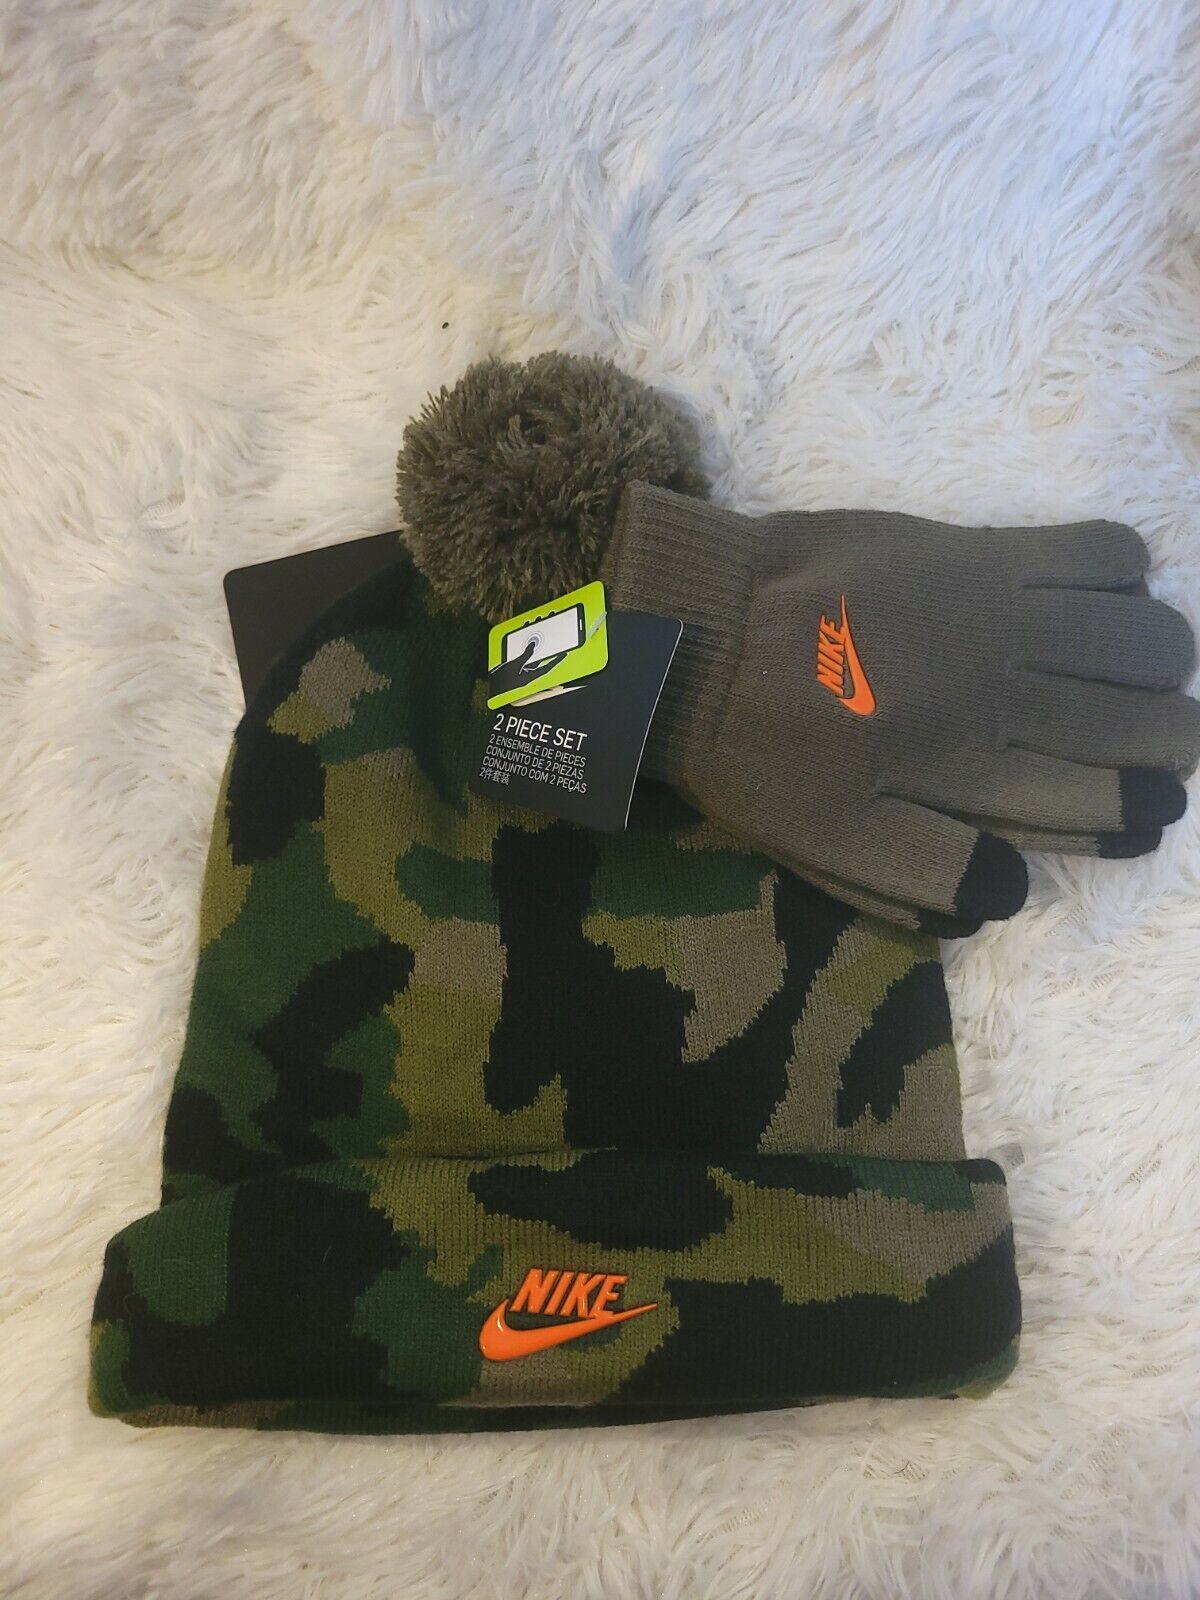 Nike Boys Youth 2 Piece Set Winter Hat (lined) And Gloves Green Camo Free Ship!